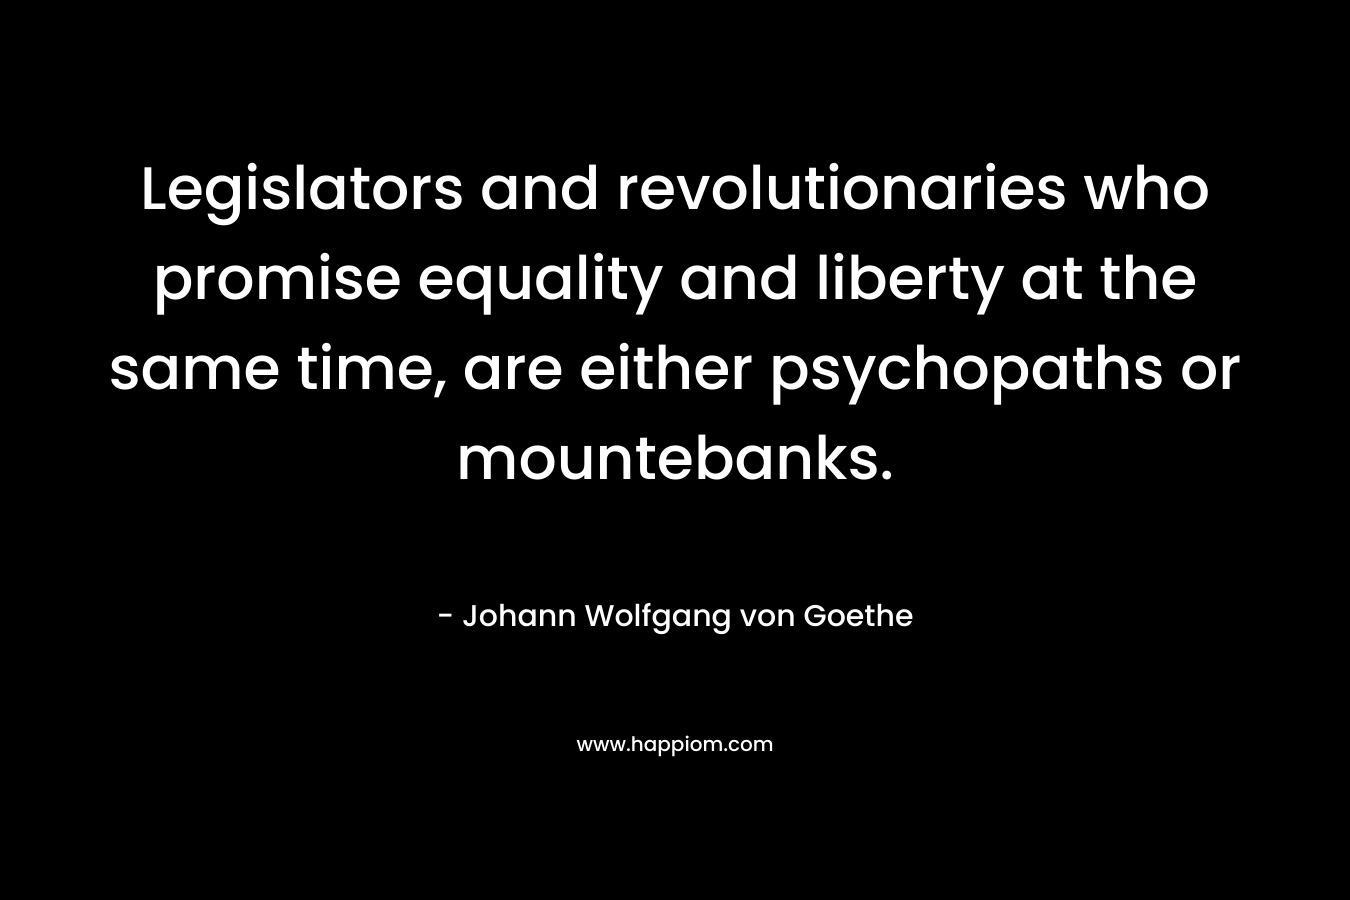 Legislators and revolutionaries who promise equality and liberty at the same time, are either psychopaths or mountebanks.